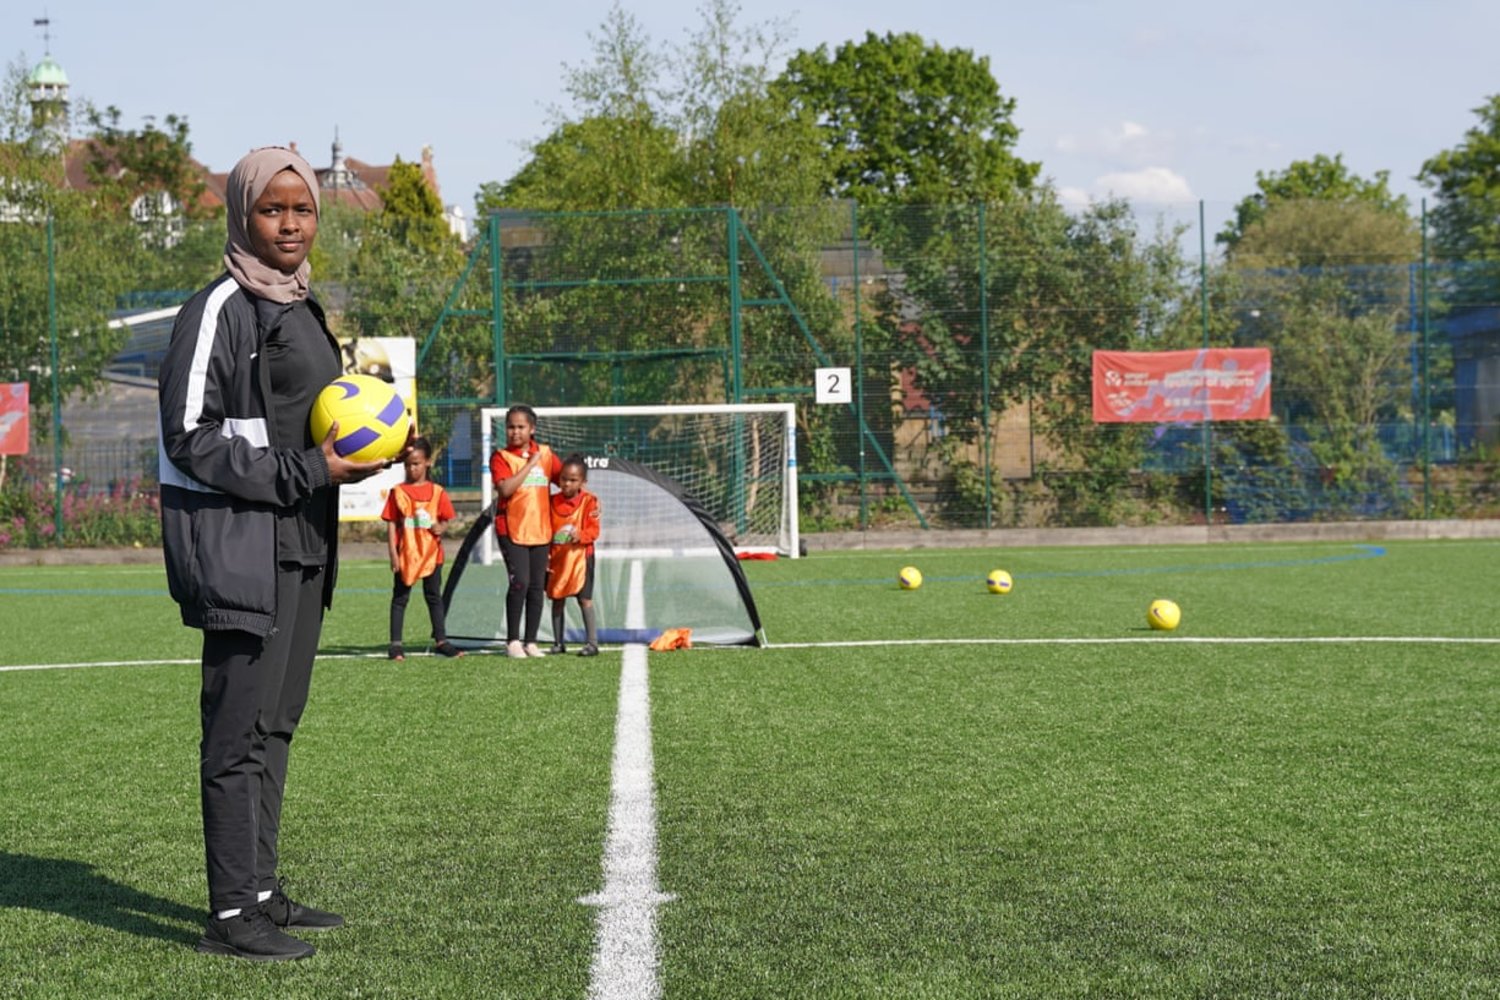  Football Association referee Jawahir Roble oversees a girls’ training session. Photograph: Moulid Hujale